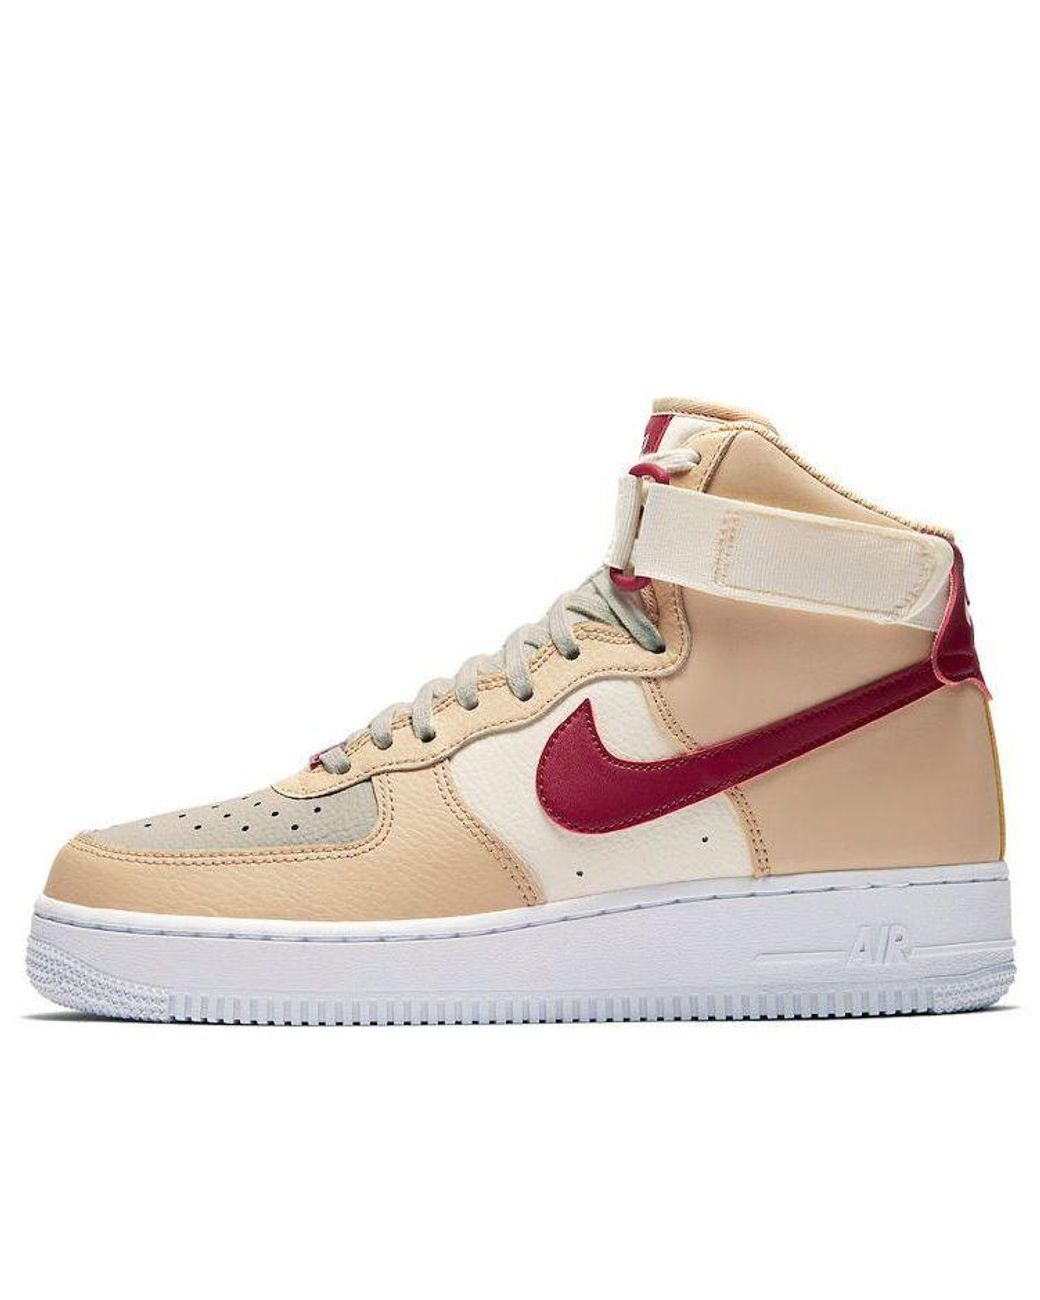 Nike Air Force 1 High Mars Yard Astronaut For Yellow/red in White | Lyst